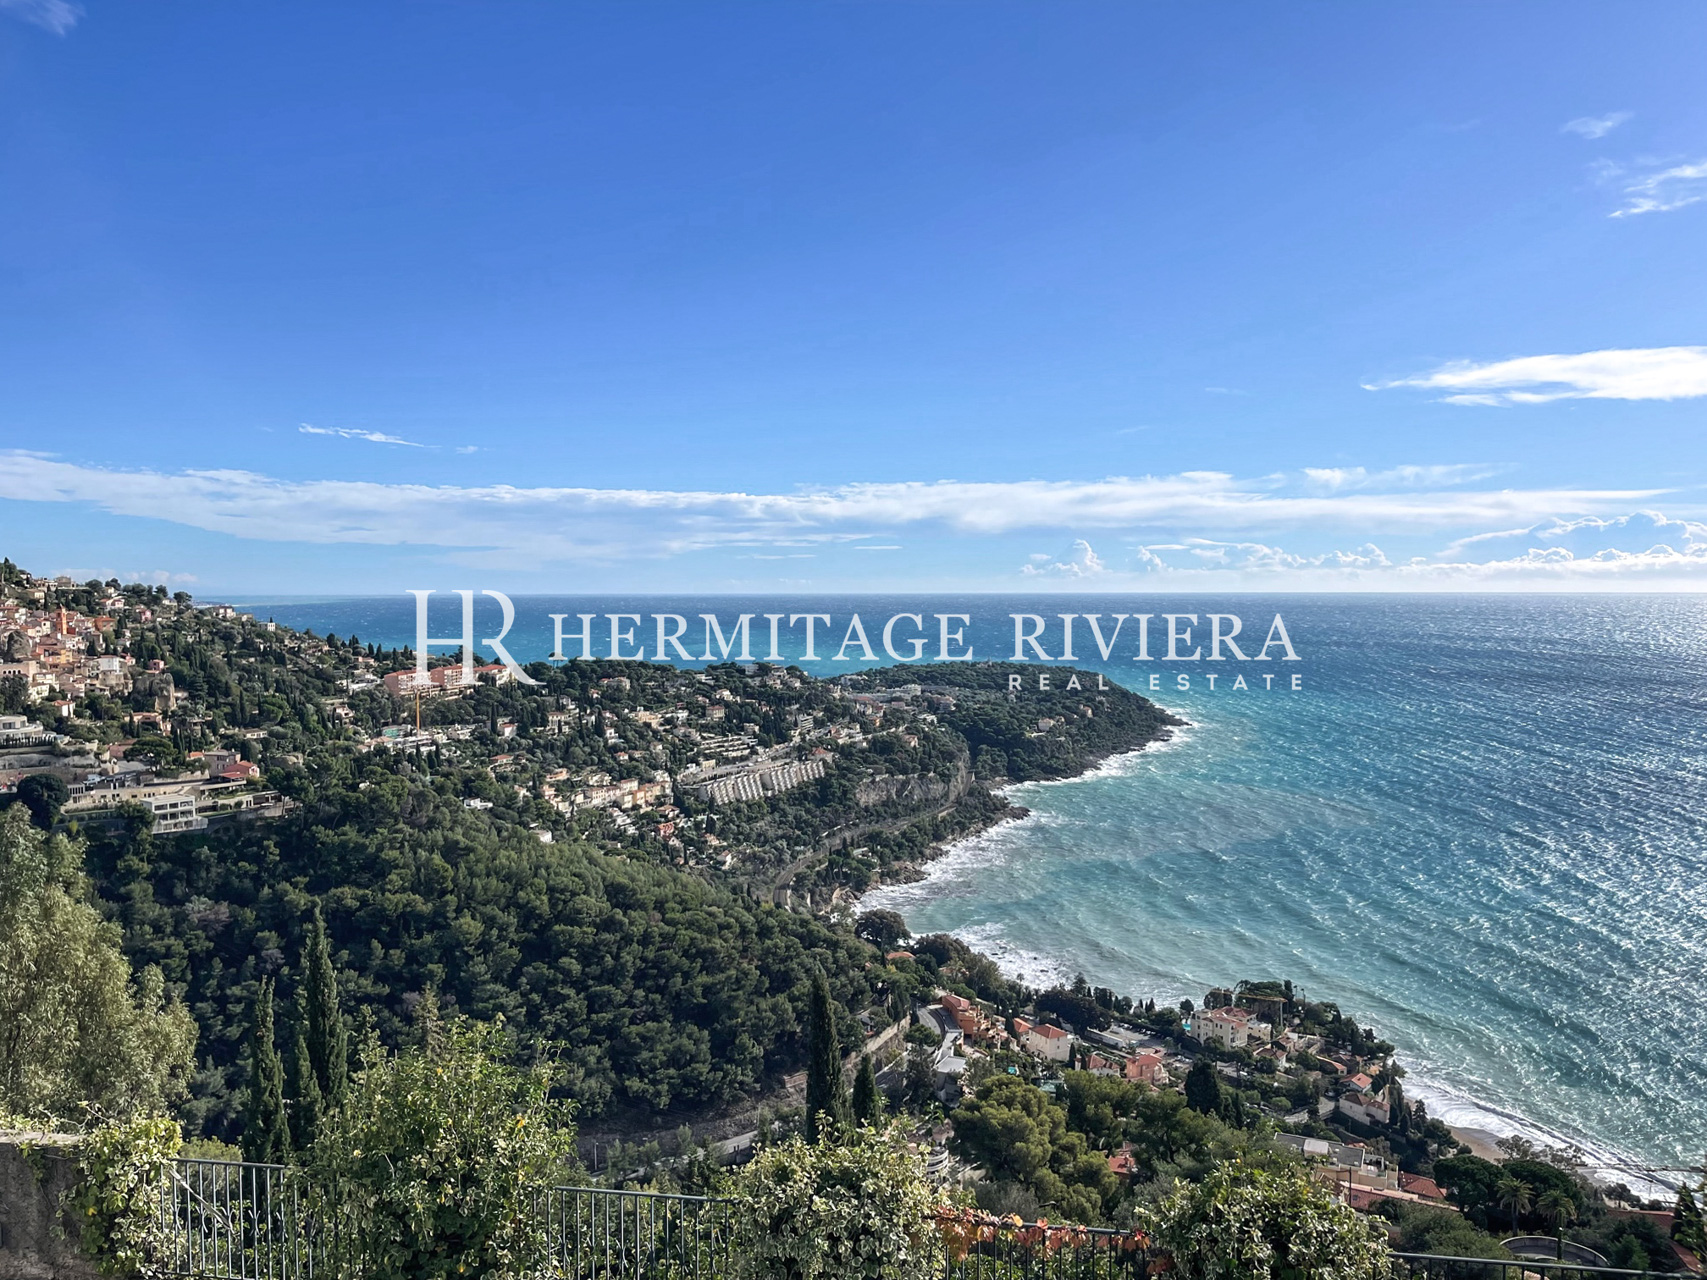 Property close Monaco with panoramic view  (image 6)